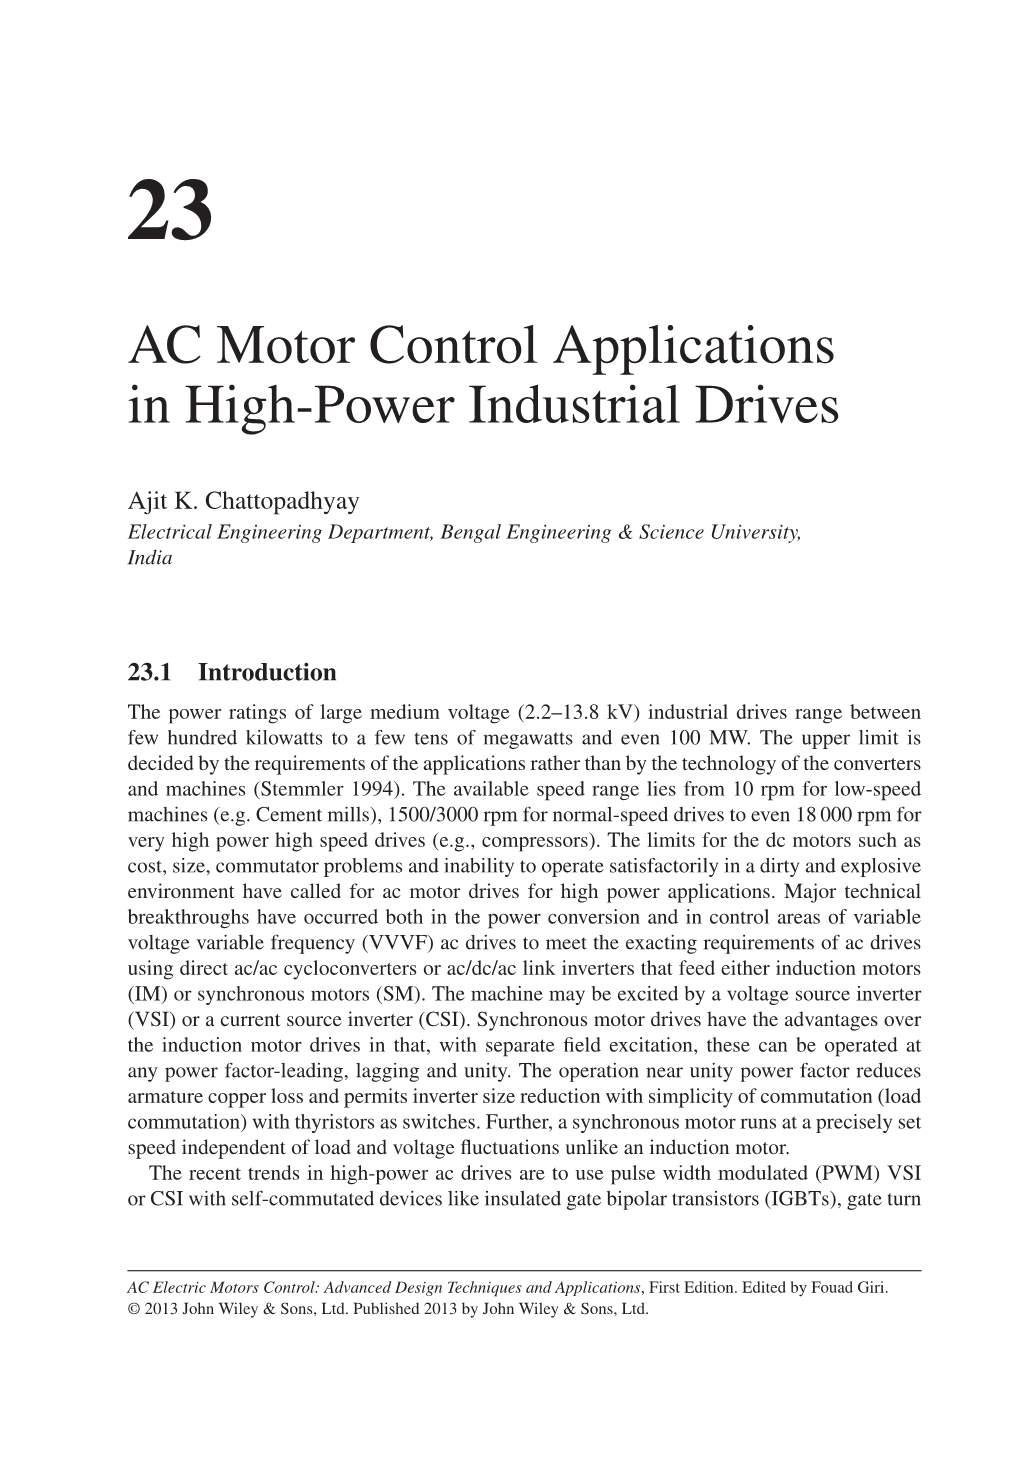 AC Motor Control Applications in High-Power Industrial Drives